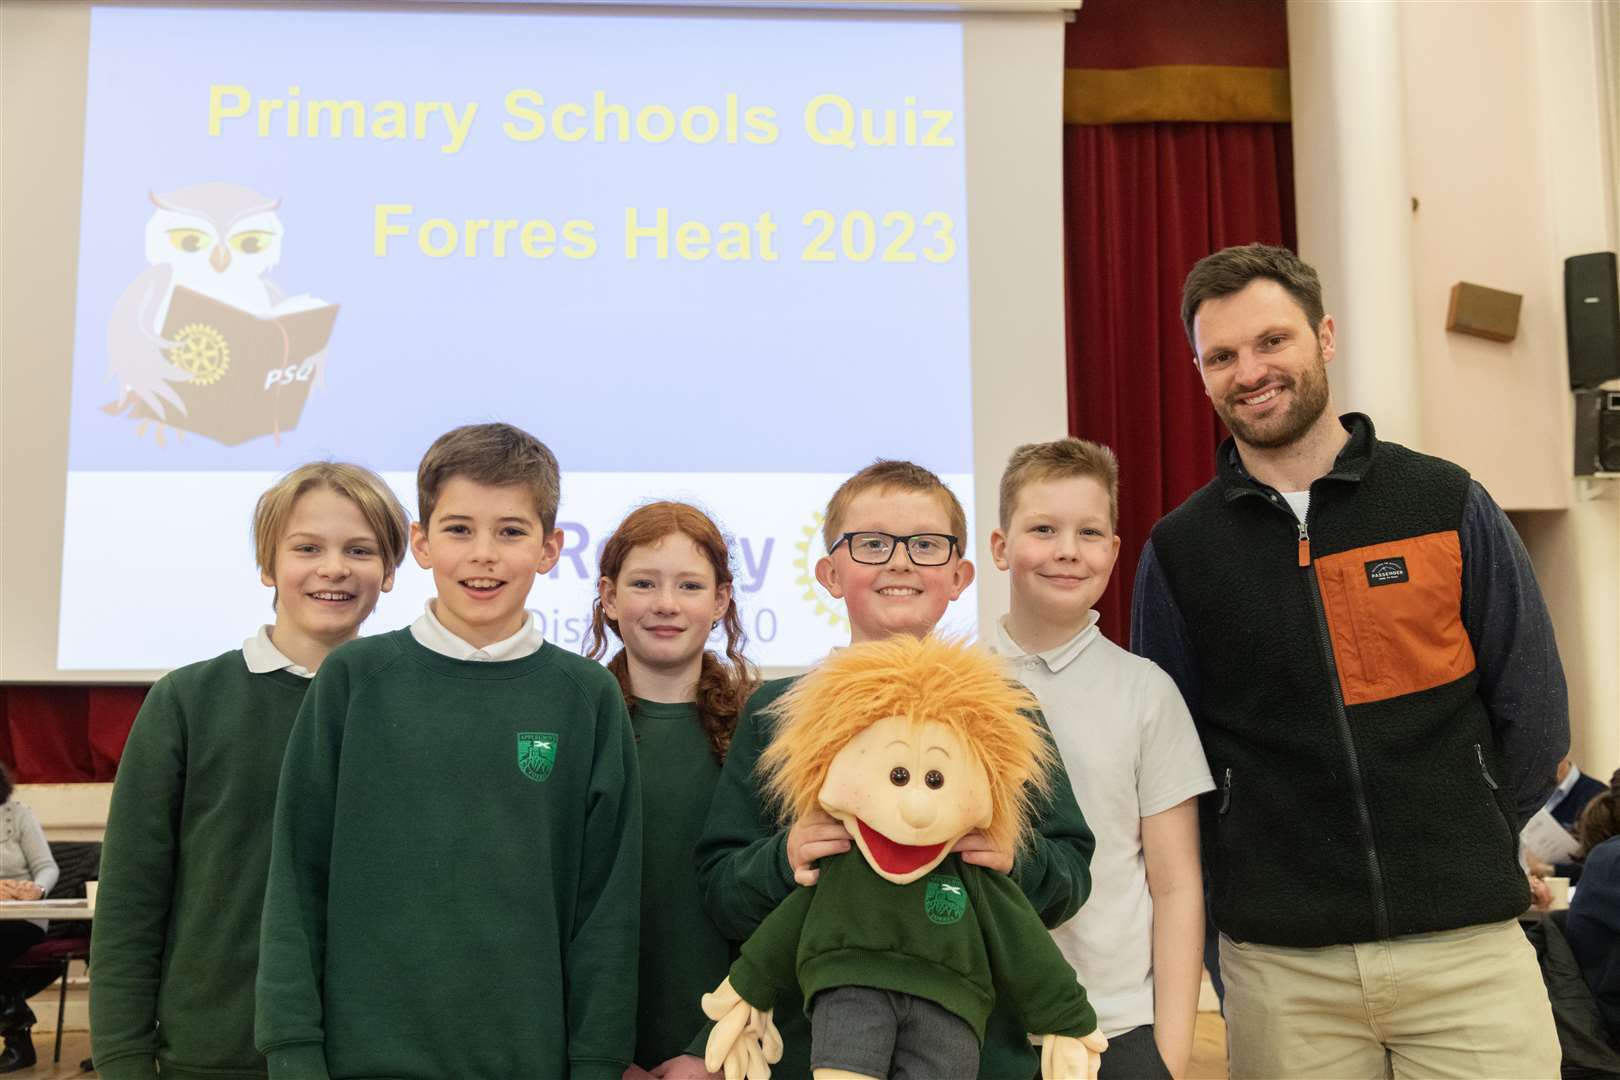 Mr Saville and the pupils from Applegrove Primary School who won the Inter-Schools Primary Quiz organised by Forres Rotary at Forres Town Hall.